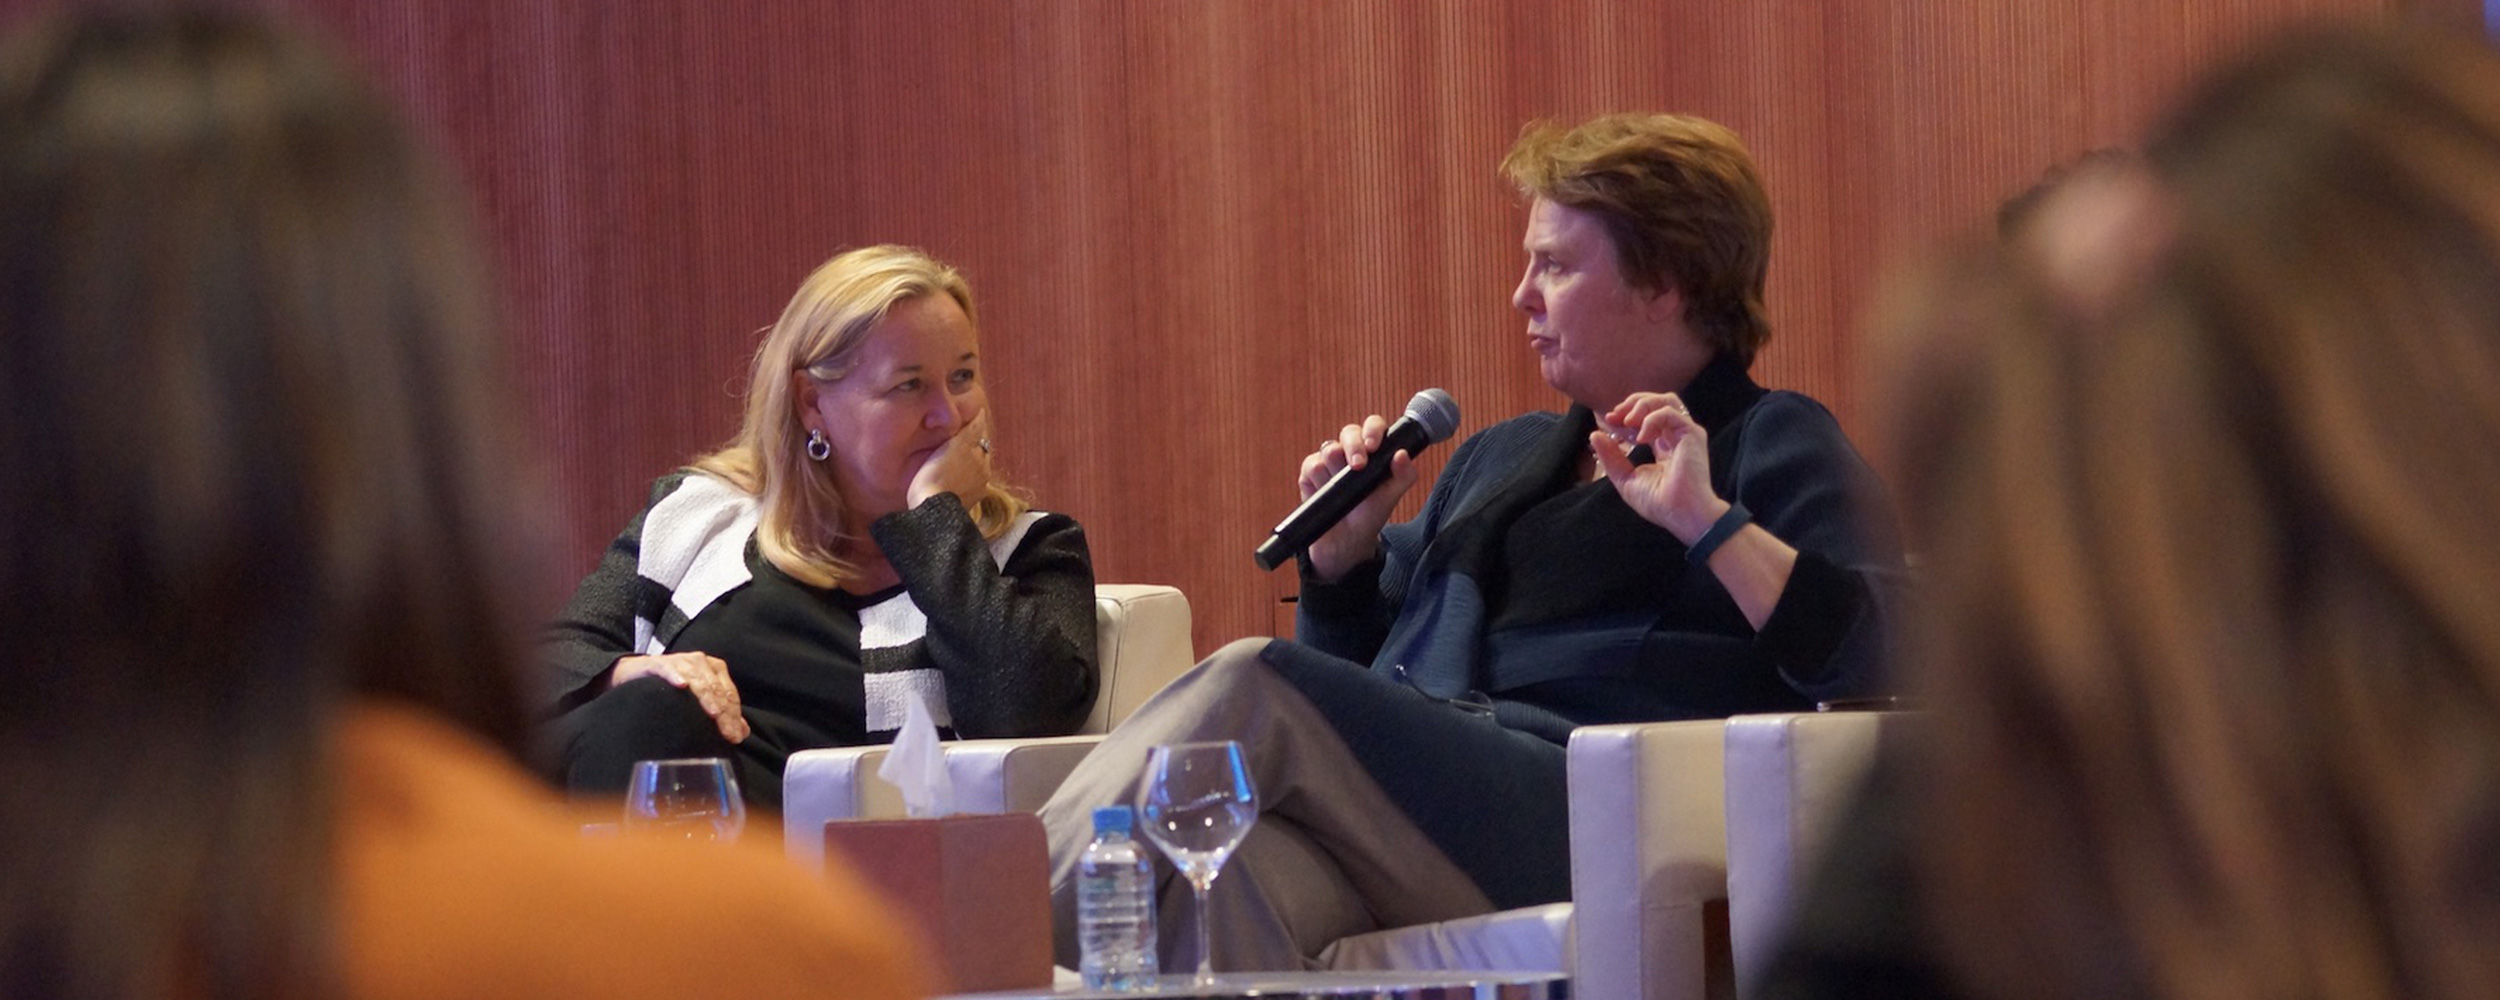 Professor Dr. Julia Lane (right), and Professor Dr. Patricia McCarney (Director, Global Cities Institute), panel discussion, Urban Data and Urban Indicators for Sustainability, Sustainable Urbanism - New Directions Workshop, 21 March 2016. © Qatar University.